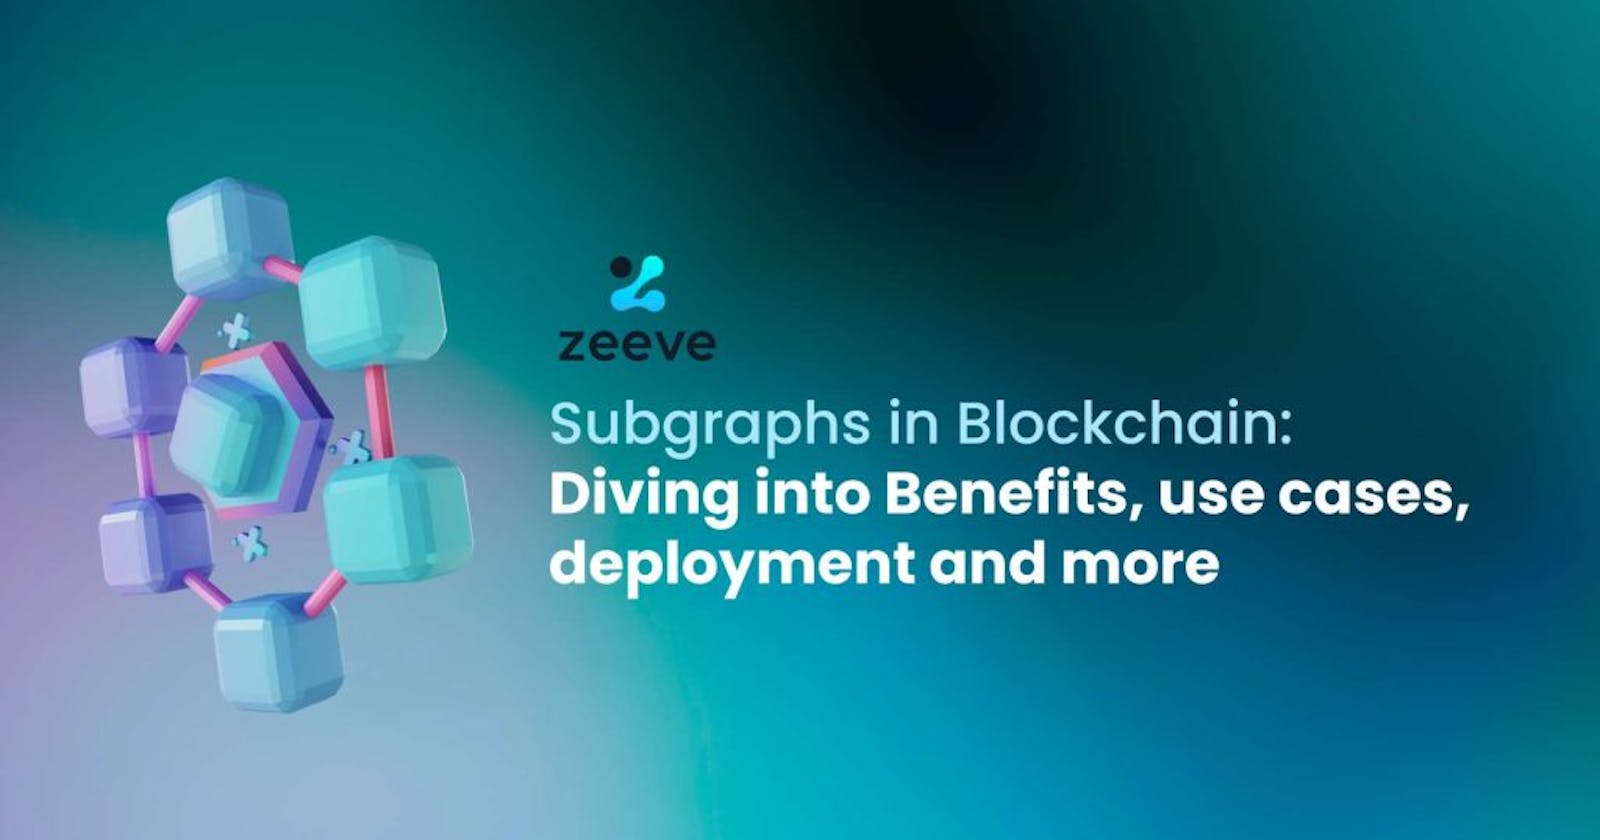 Subgraphs in blockchain: Diving into Benefits, use cases, deployment, and more